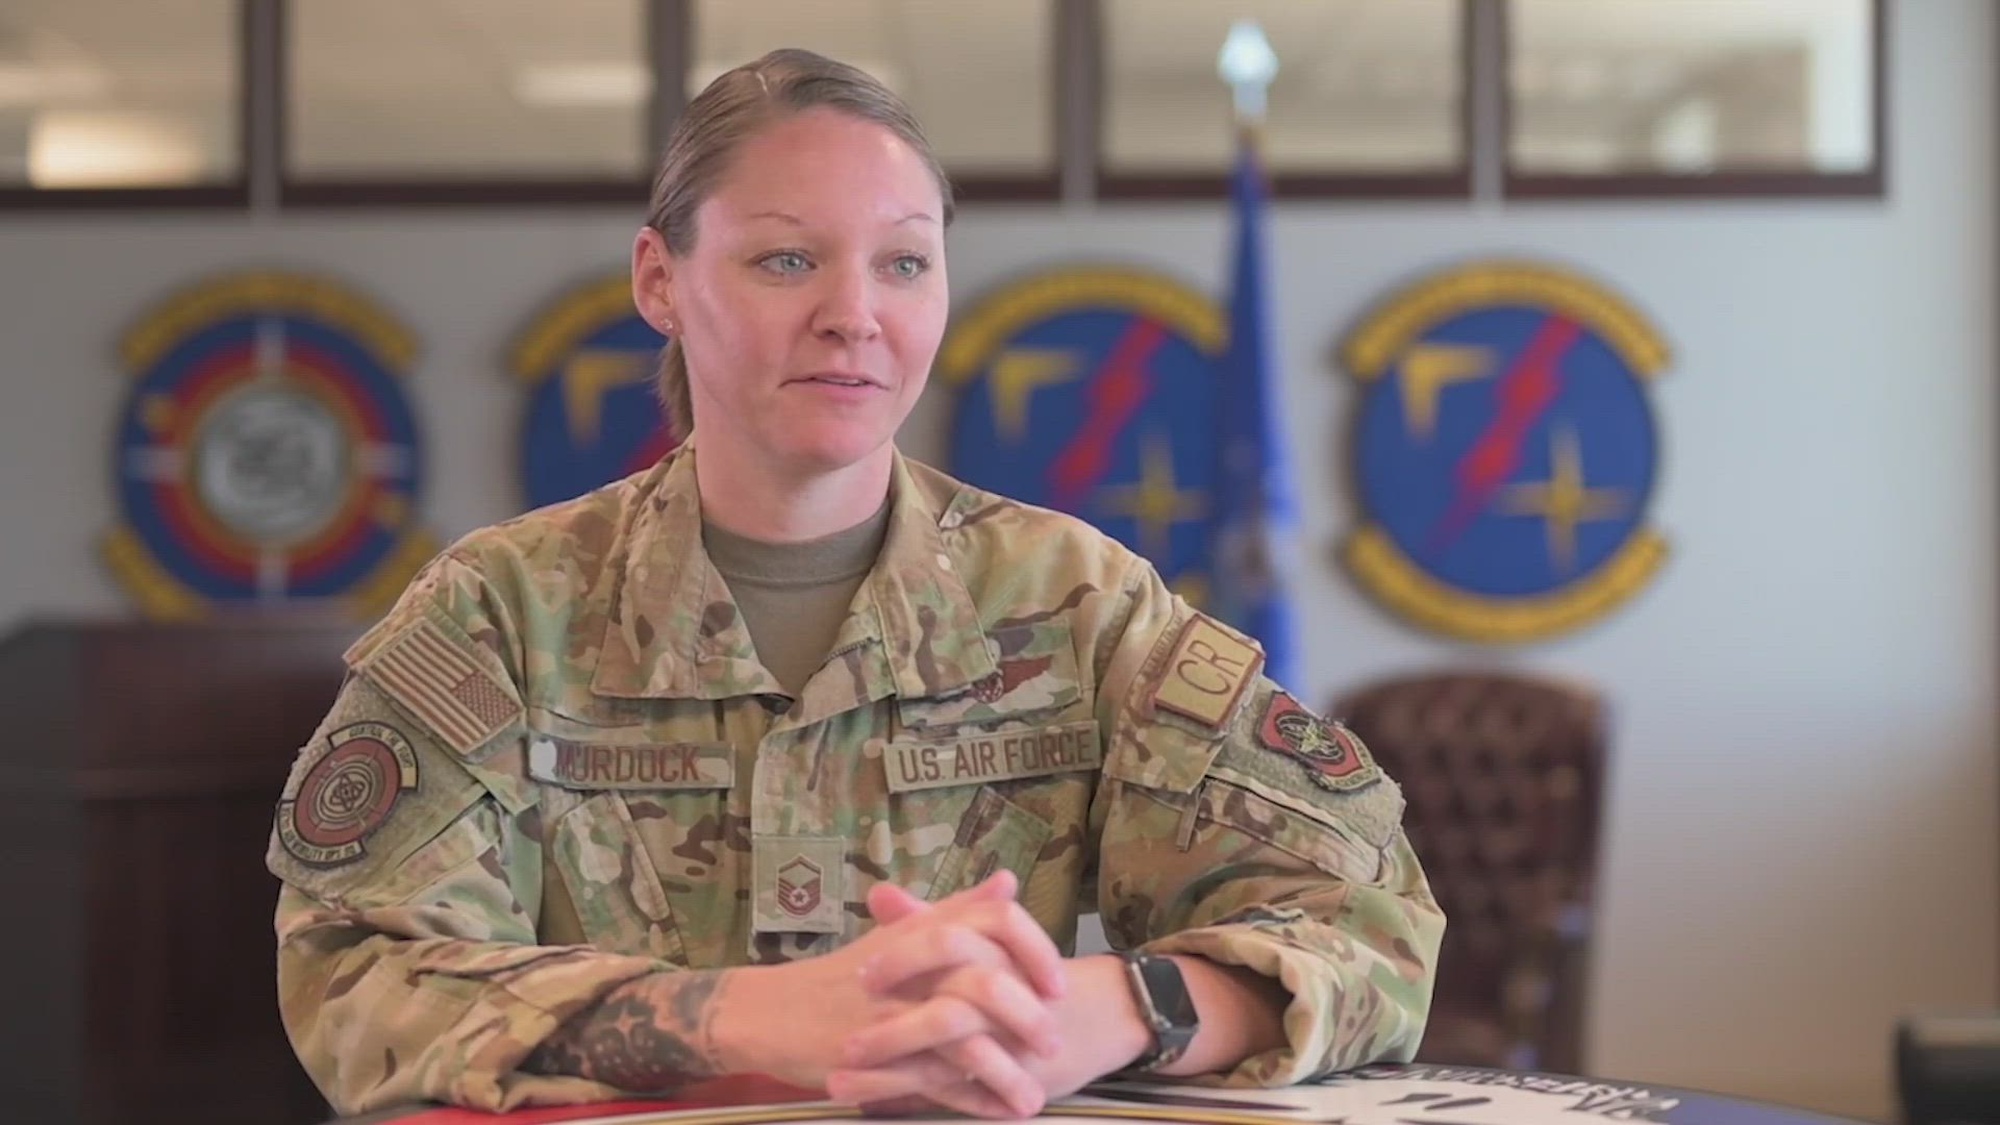 U.S. Air Force Master Sgt. Blakeley Murdock, 321st Air Mobility Squadron mobility flight chief, shares a Veterans Day message at Travis Air Force Base, California, Oct. 24. 2022. (U.S. Air Force video by Chustine Minoda)